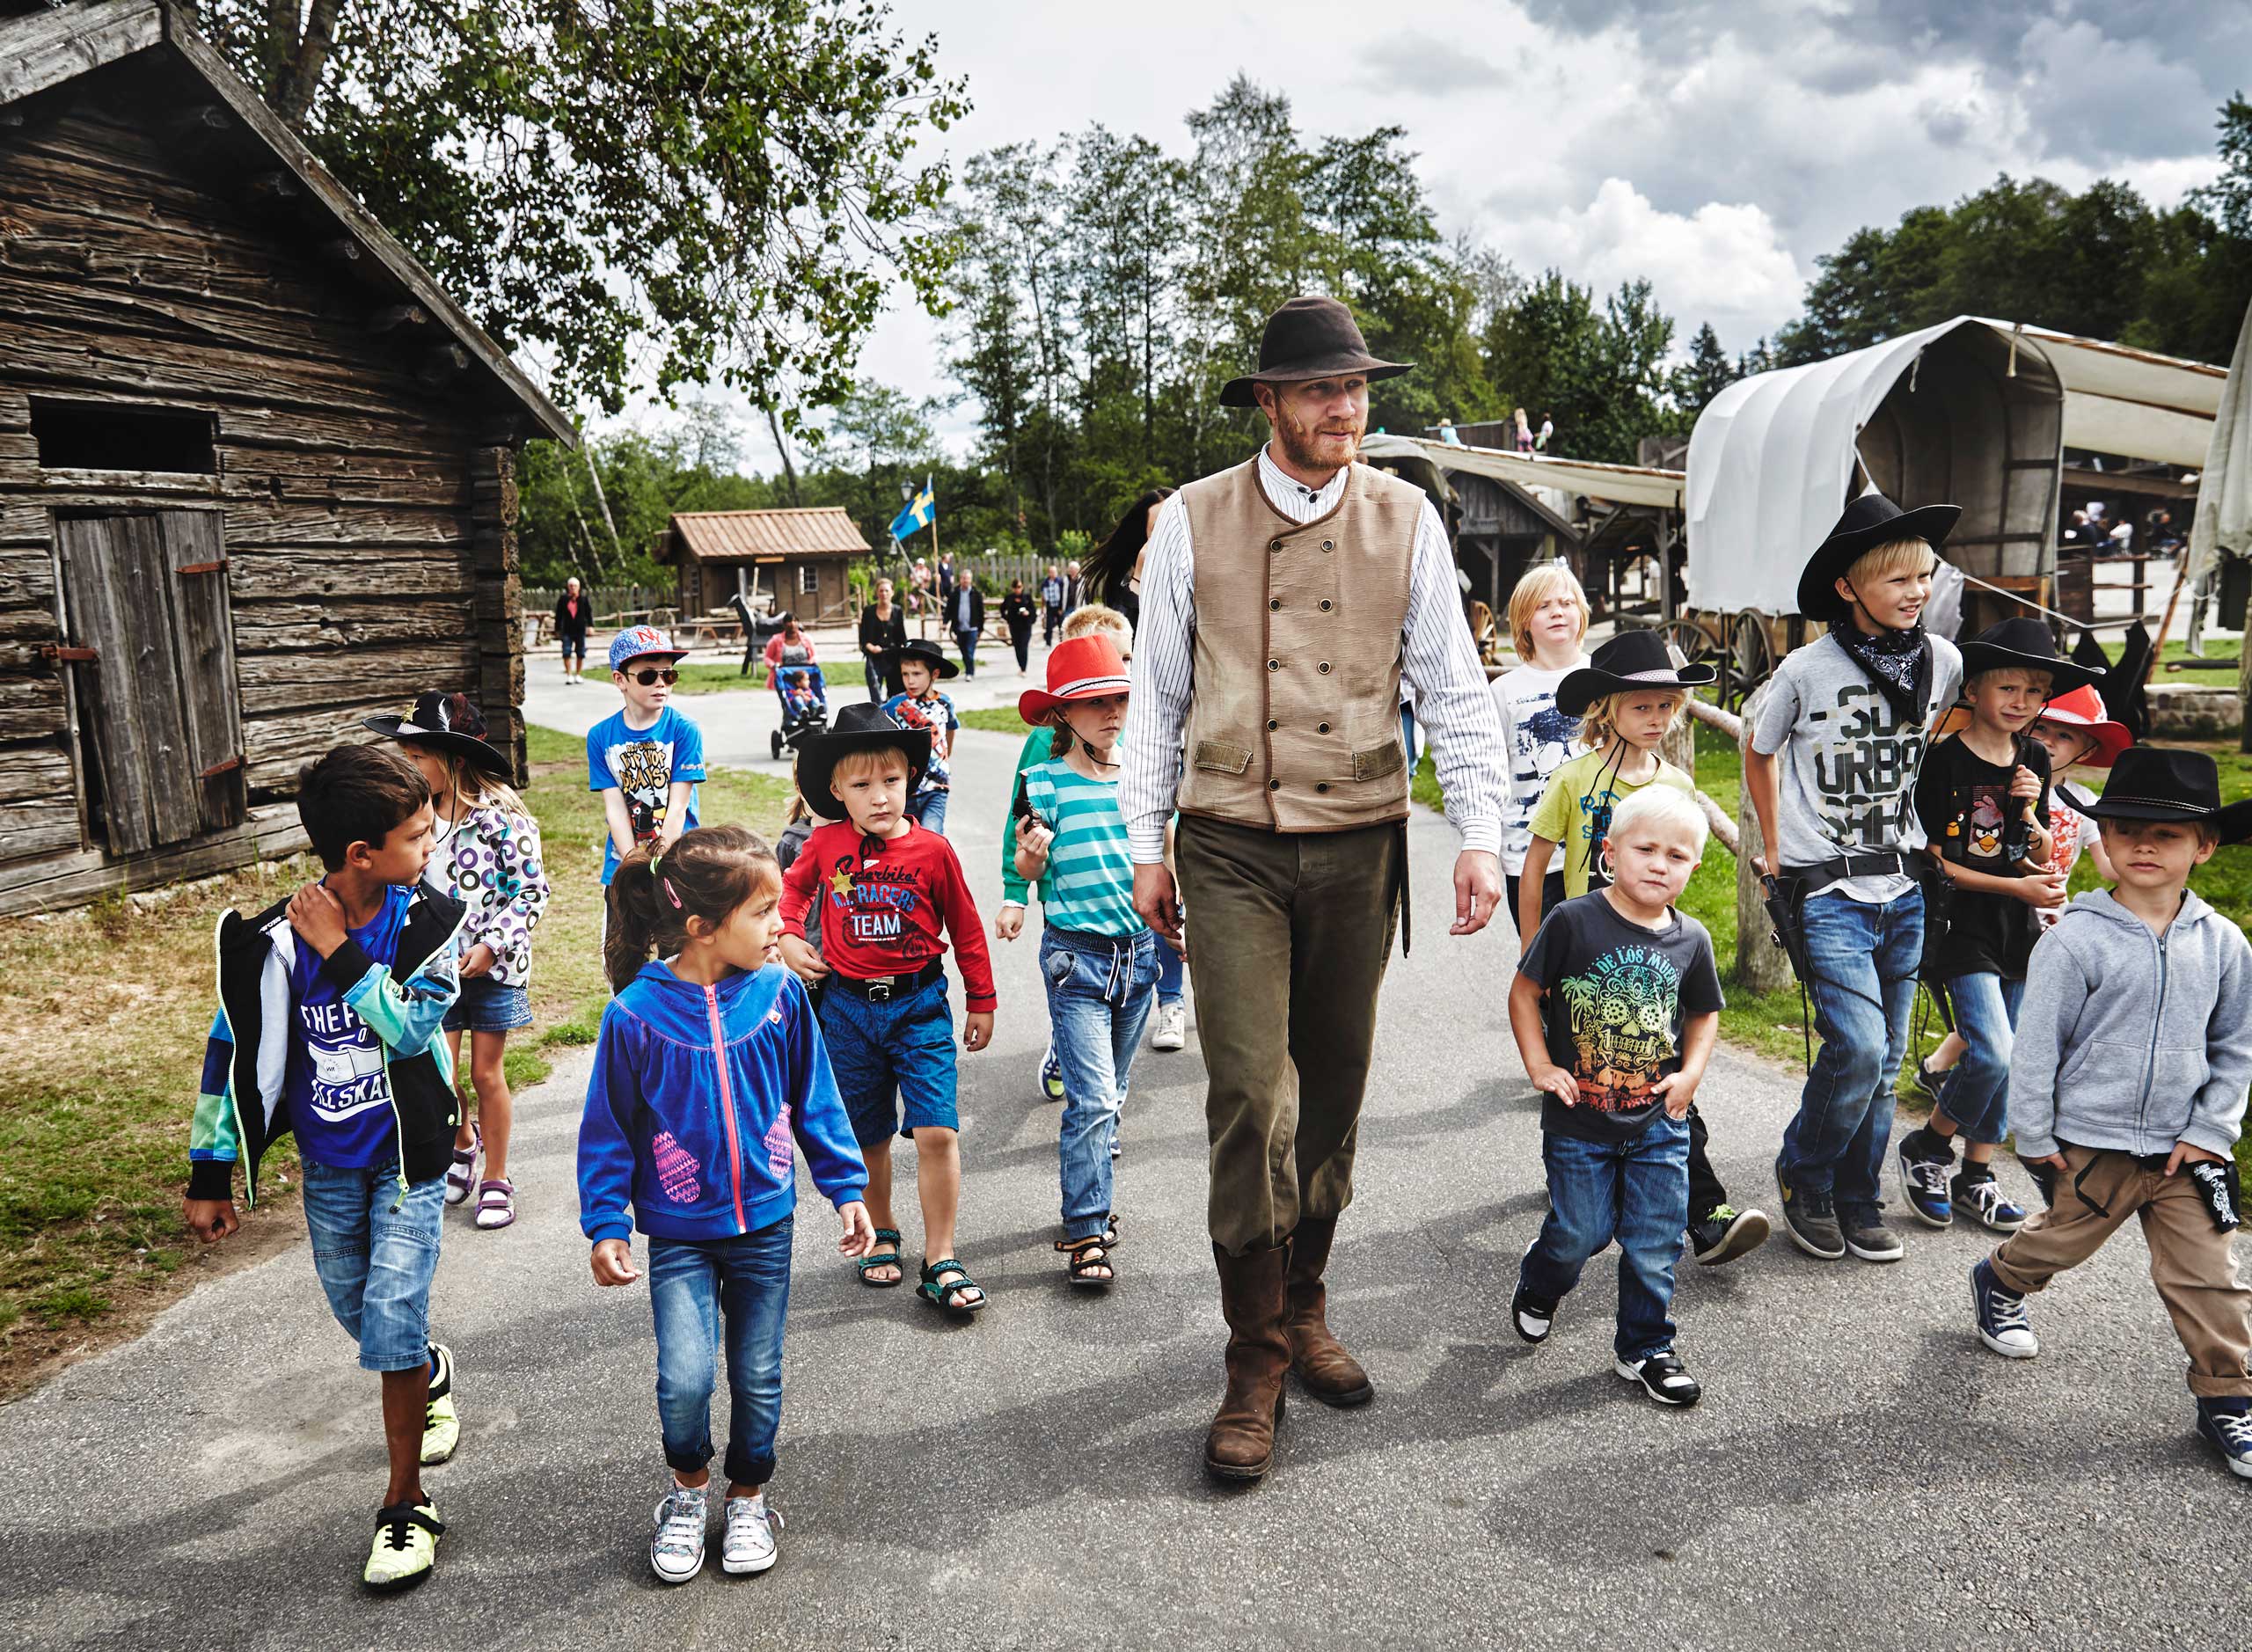 High Chaparral offers adventures for people of all ages. Copyright: High Chaparral